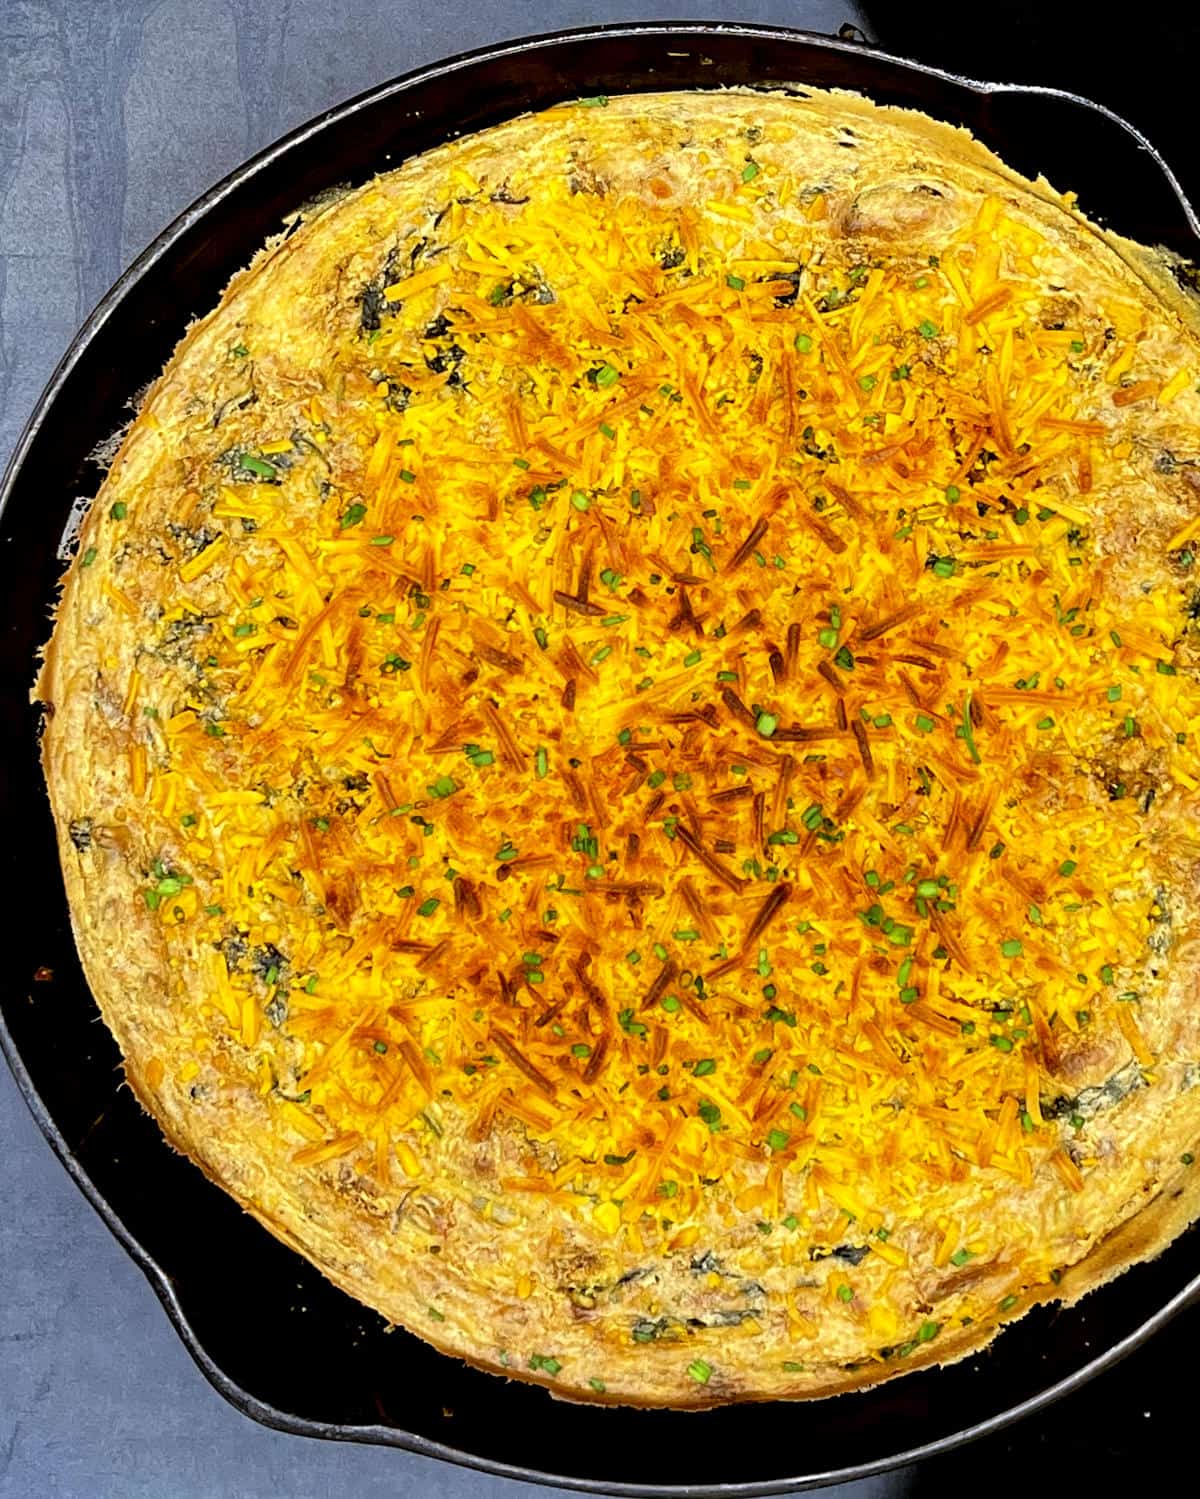 Vegan low carb breakfast casserole with crackly cheese topping in black cast iron skillet.